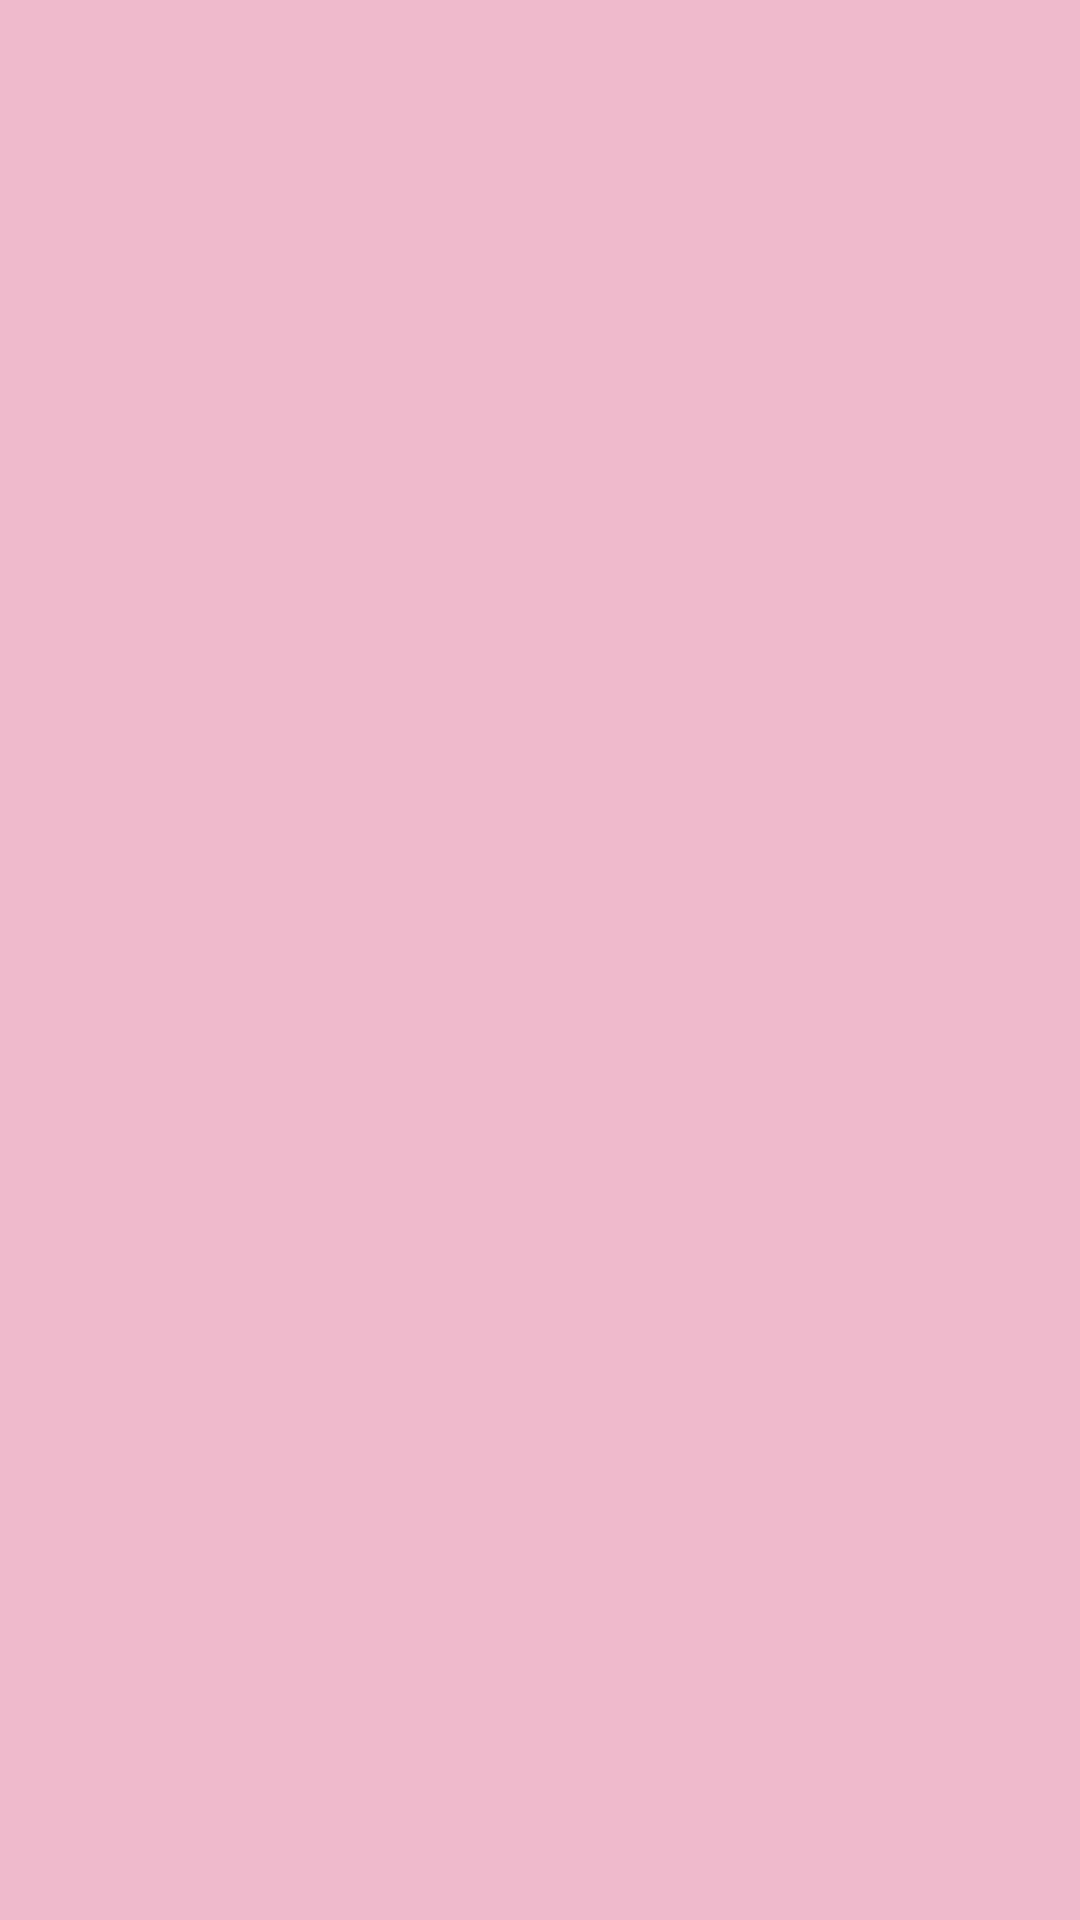 1080x1920 Cameo Pink Solid Color Background